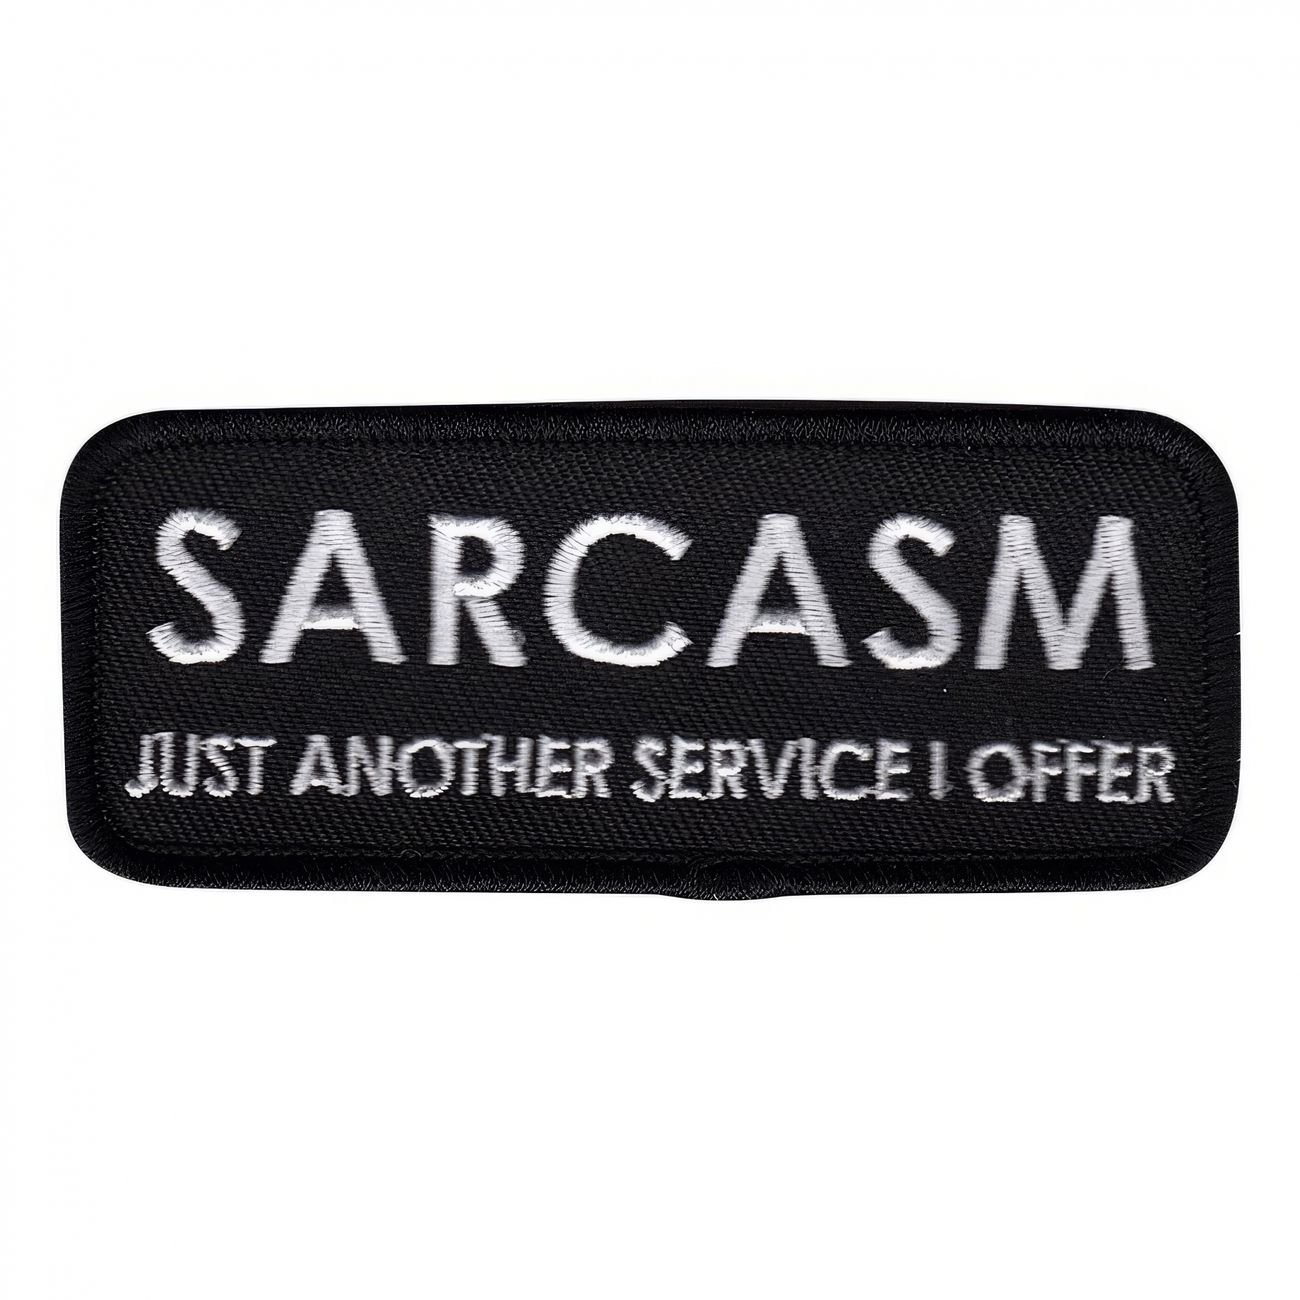 tygmarke-sarcasm-just-another-service-a-94623-1